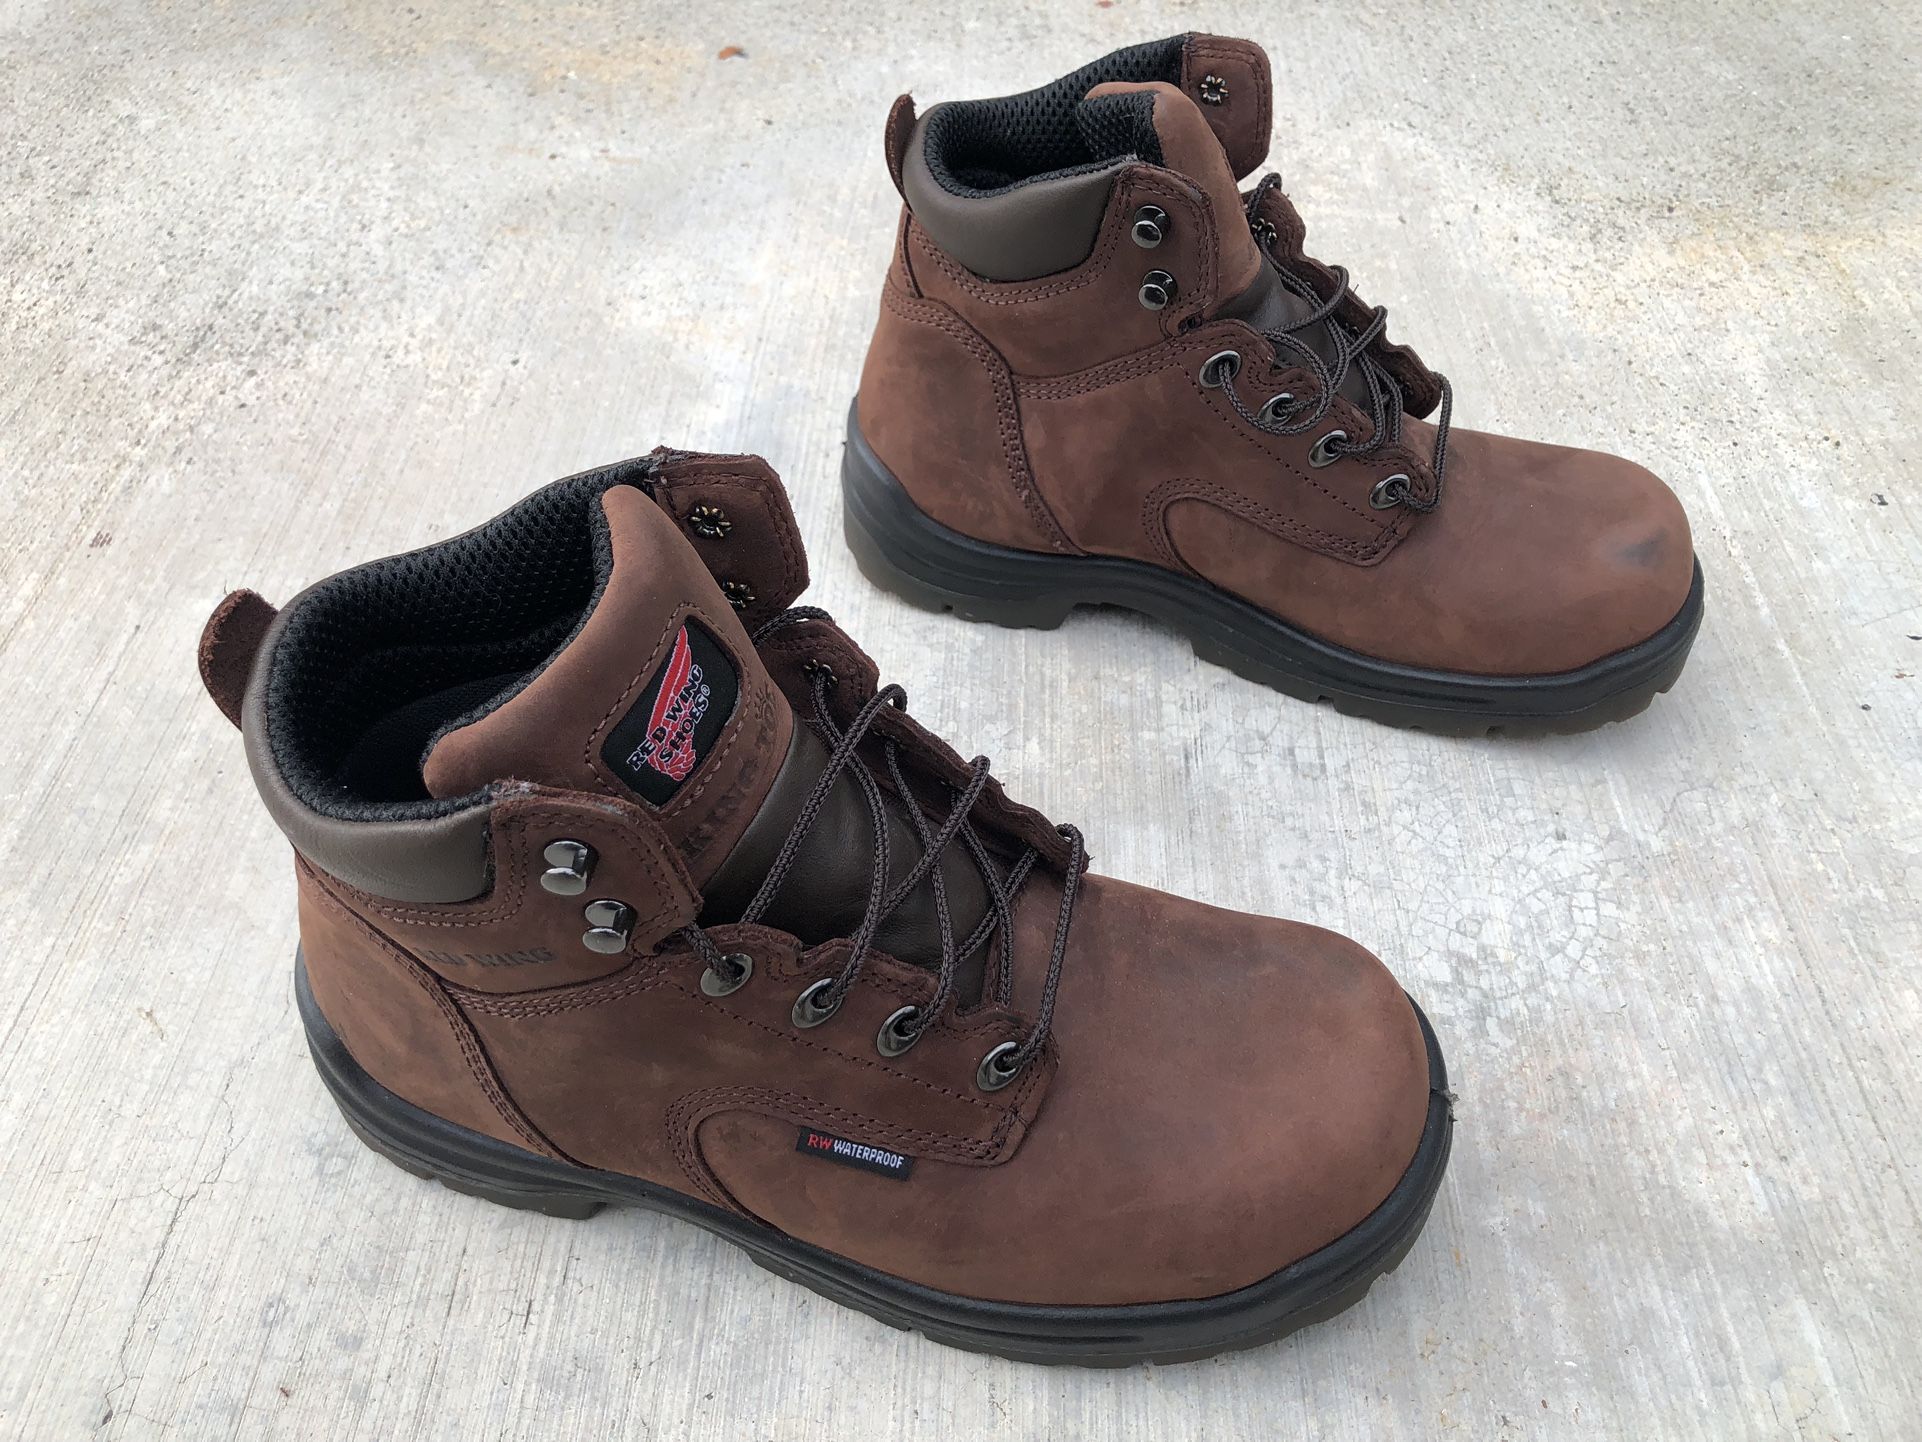 Red Wings Work Boots King Toe Style 2243 Mens 6in Safety Toe Boot. Size 8 . We’re purchased about 2 months ago and only used them twice